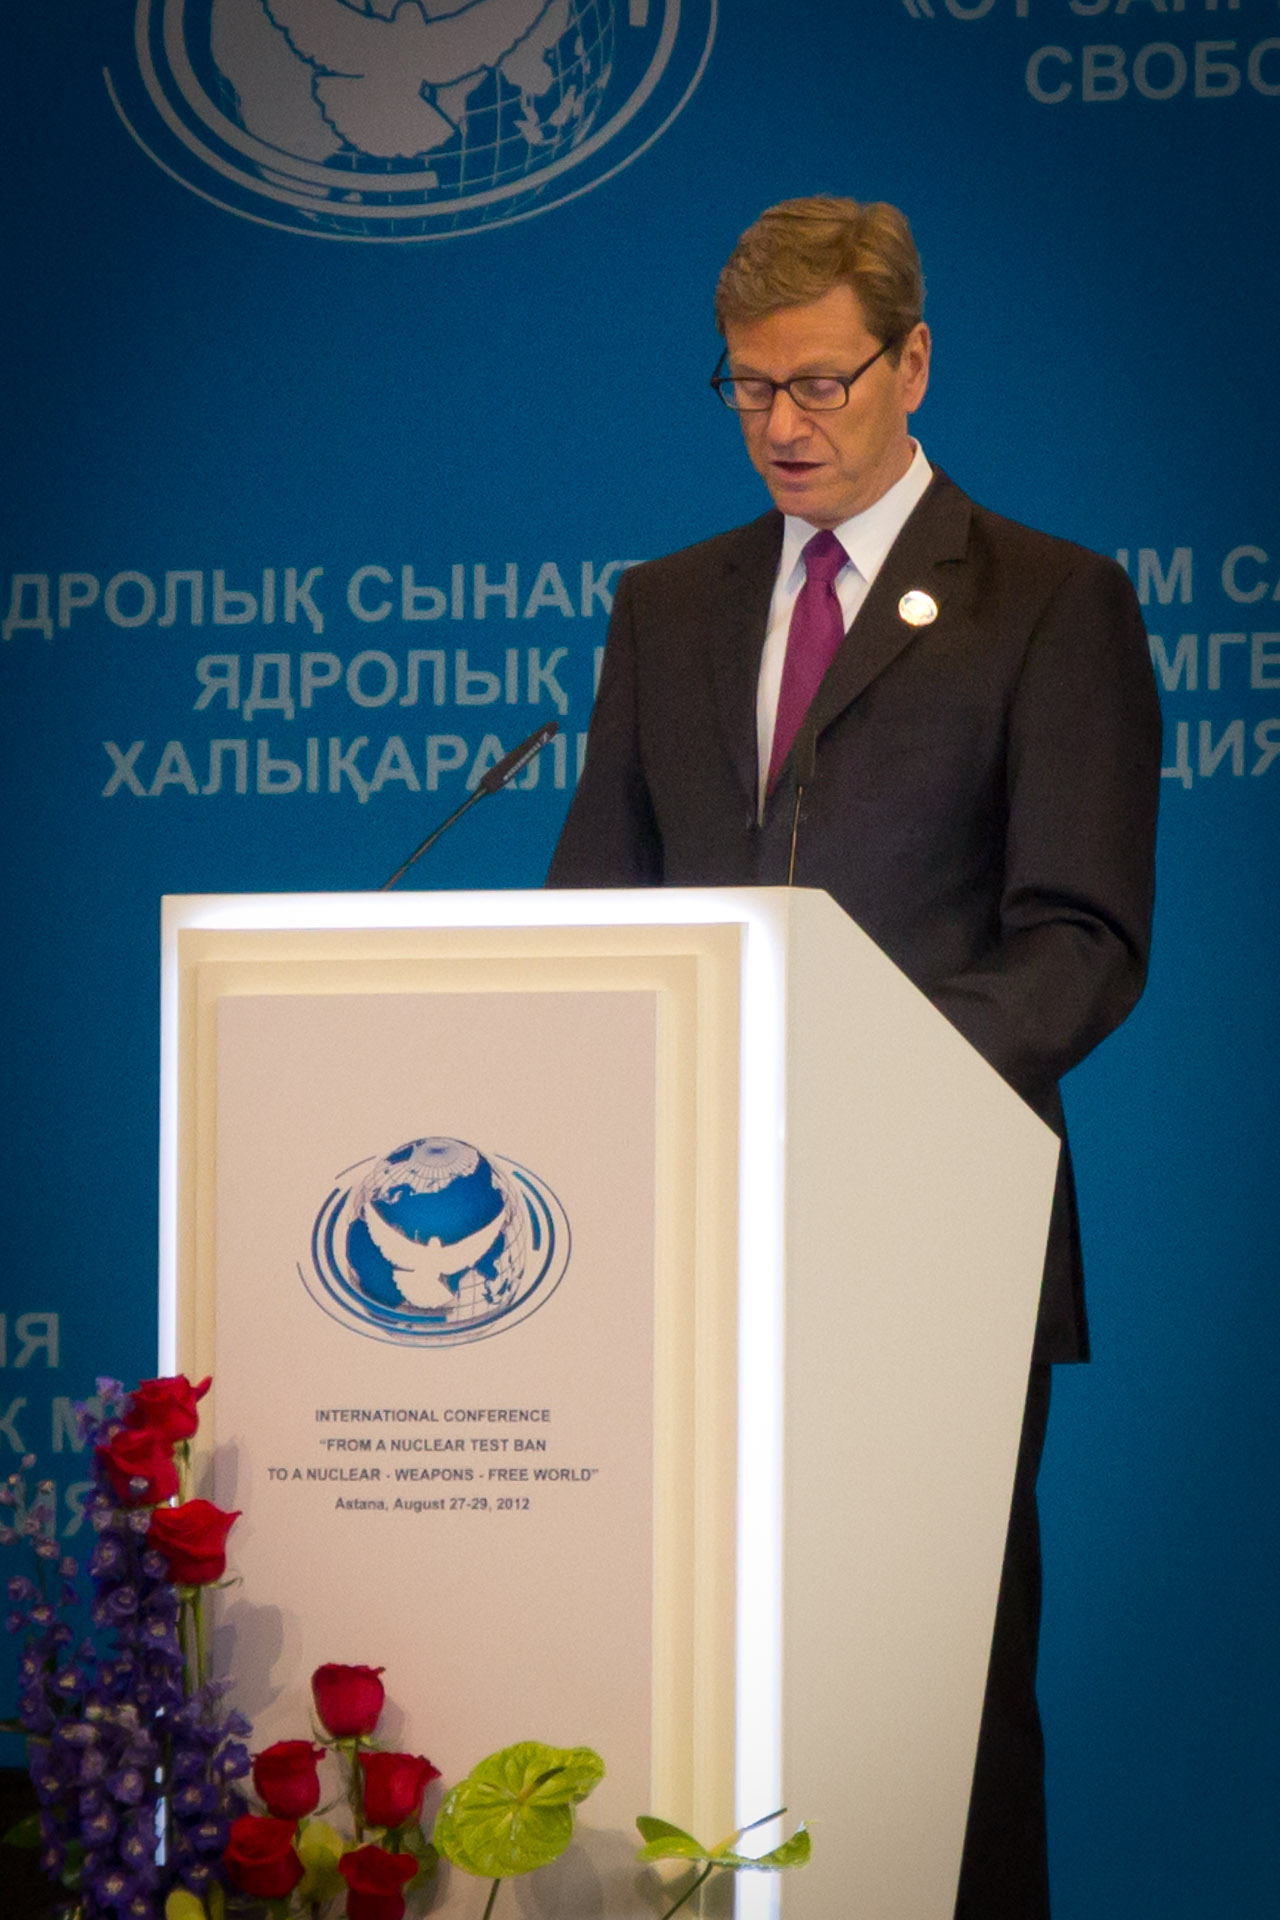 Guido Westerwelle, German Foreign Minister 